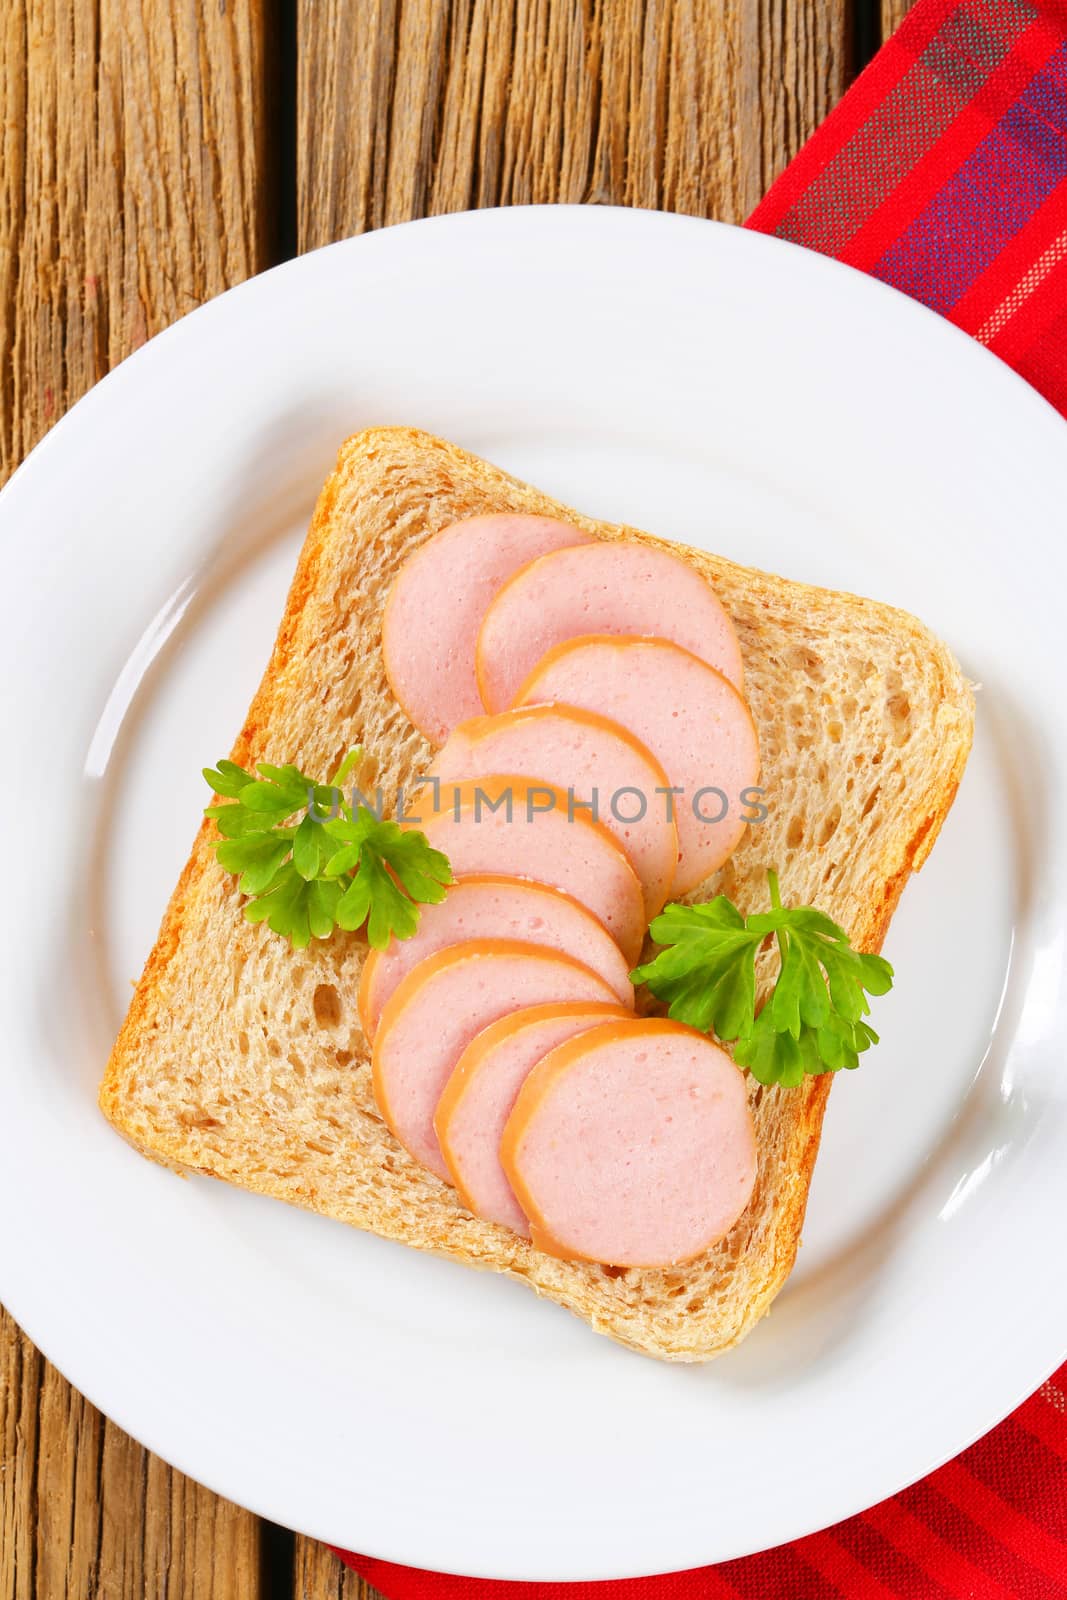 Whole wheat bread with slices of lean sausage